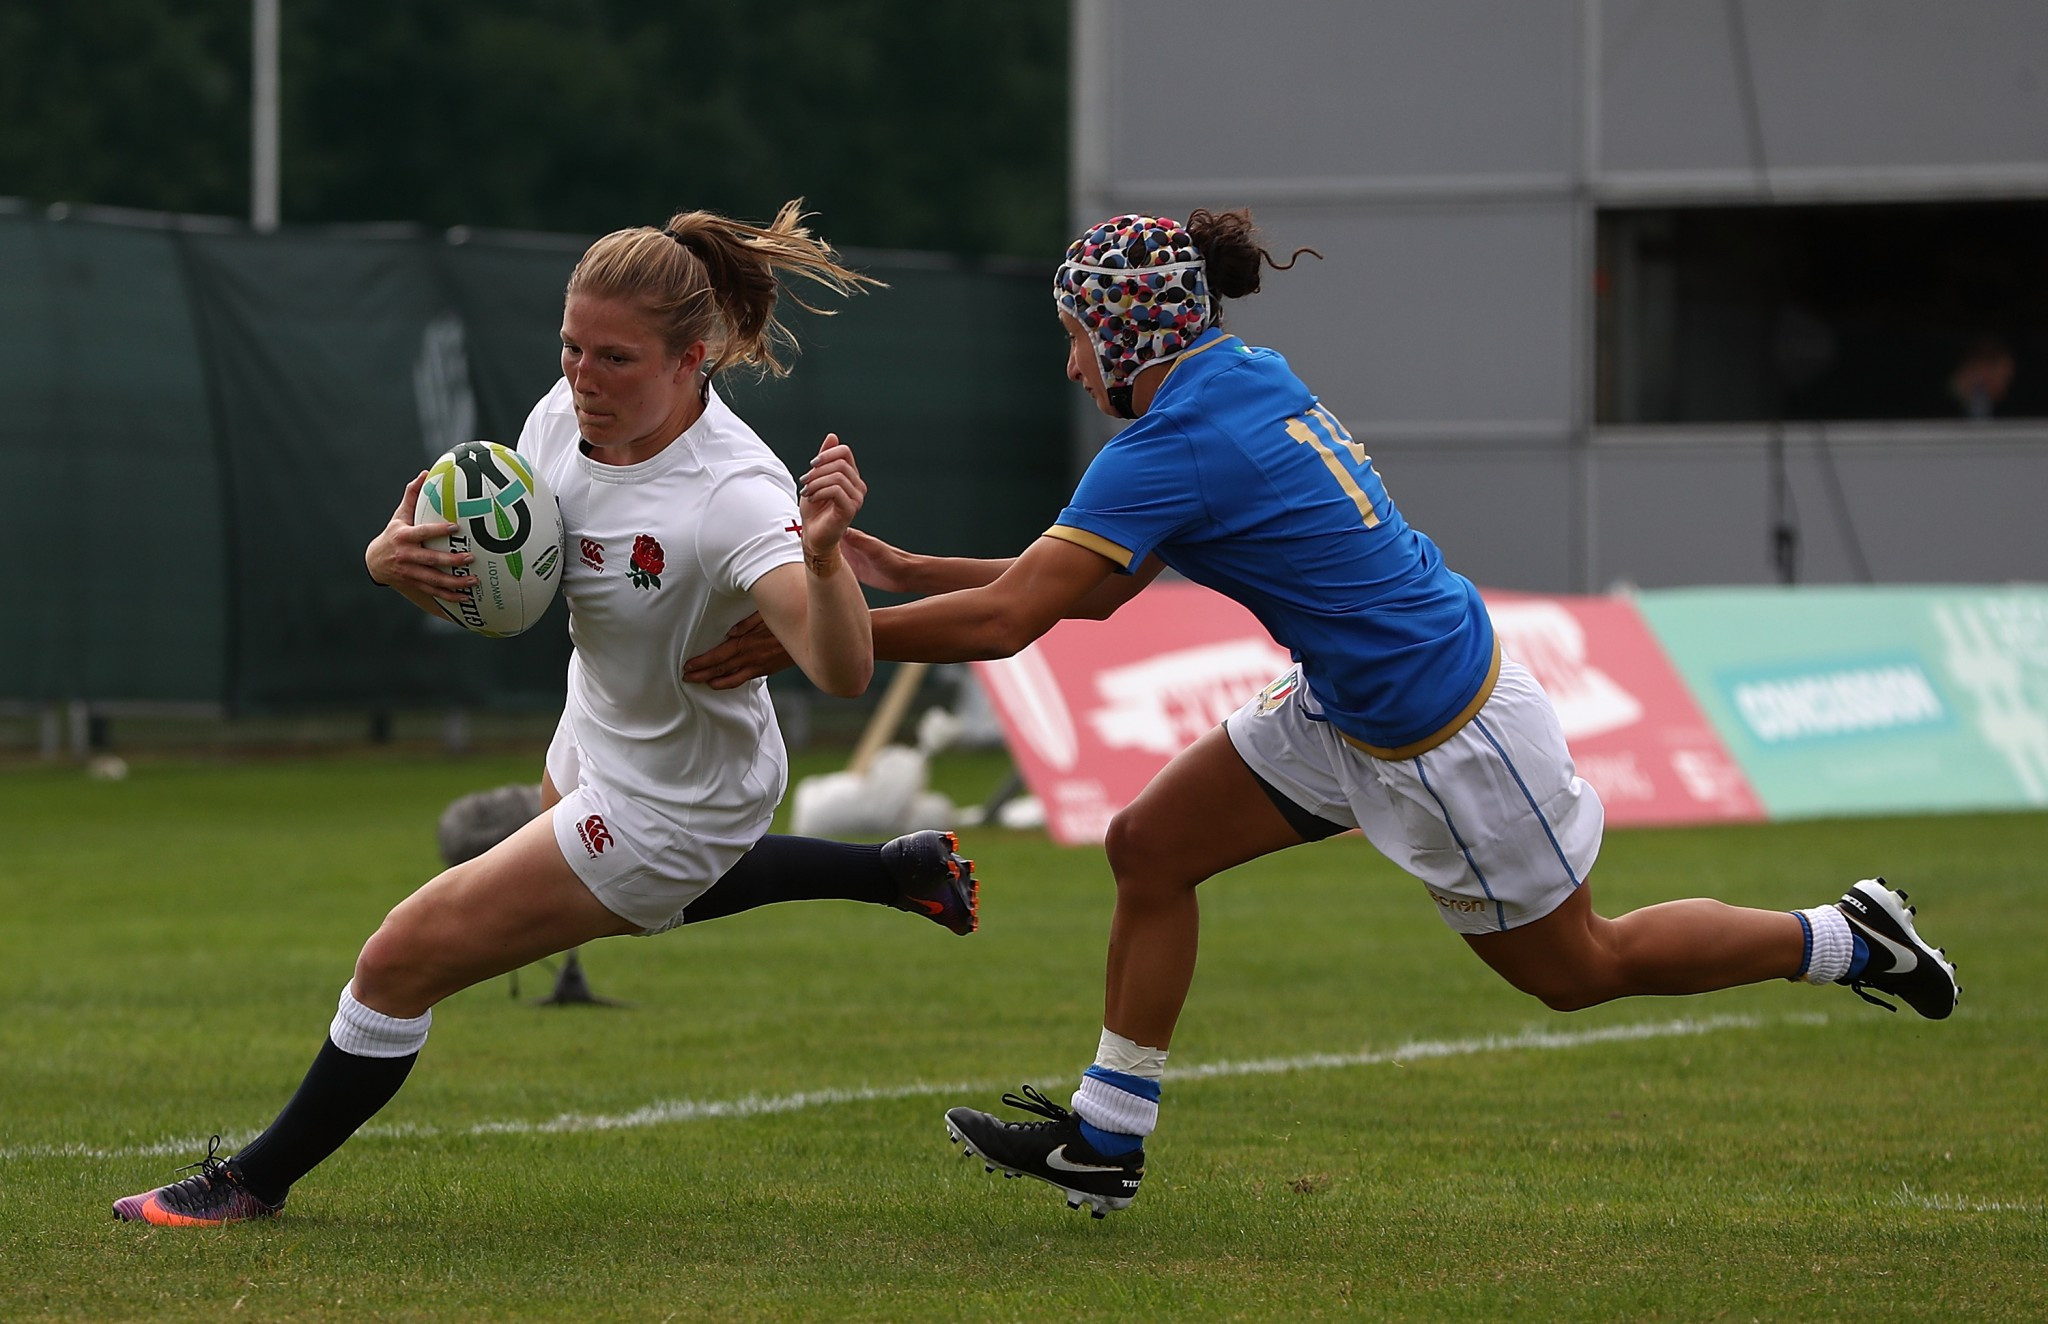 England eased past Italy at the Women's Rugby World Cup ©Getty Images